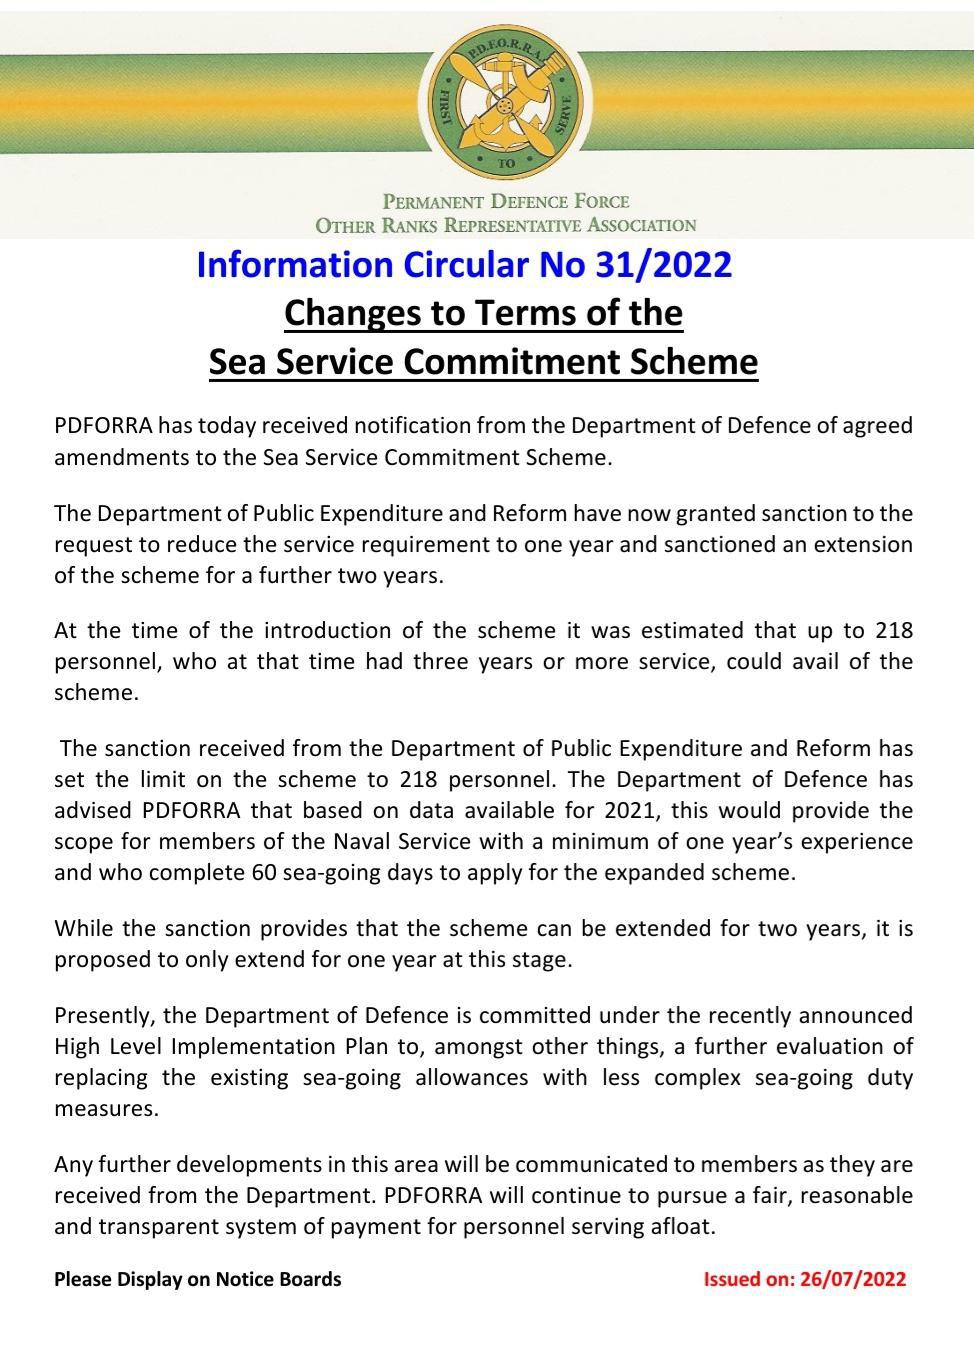 Information Circular No 31 of 22 - Changes to Terms of the Sea Service Commitment Scheme